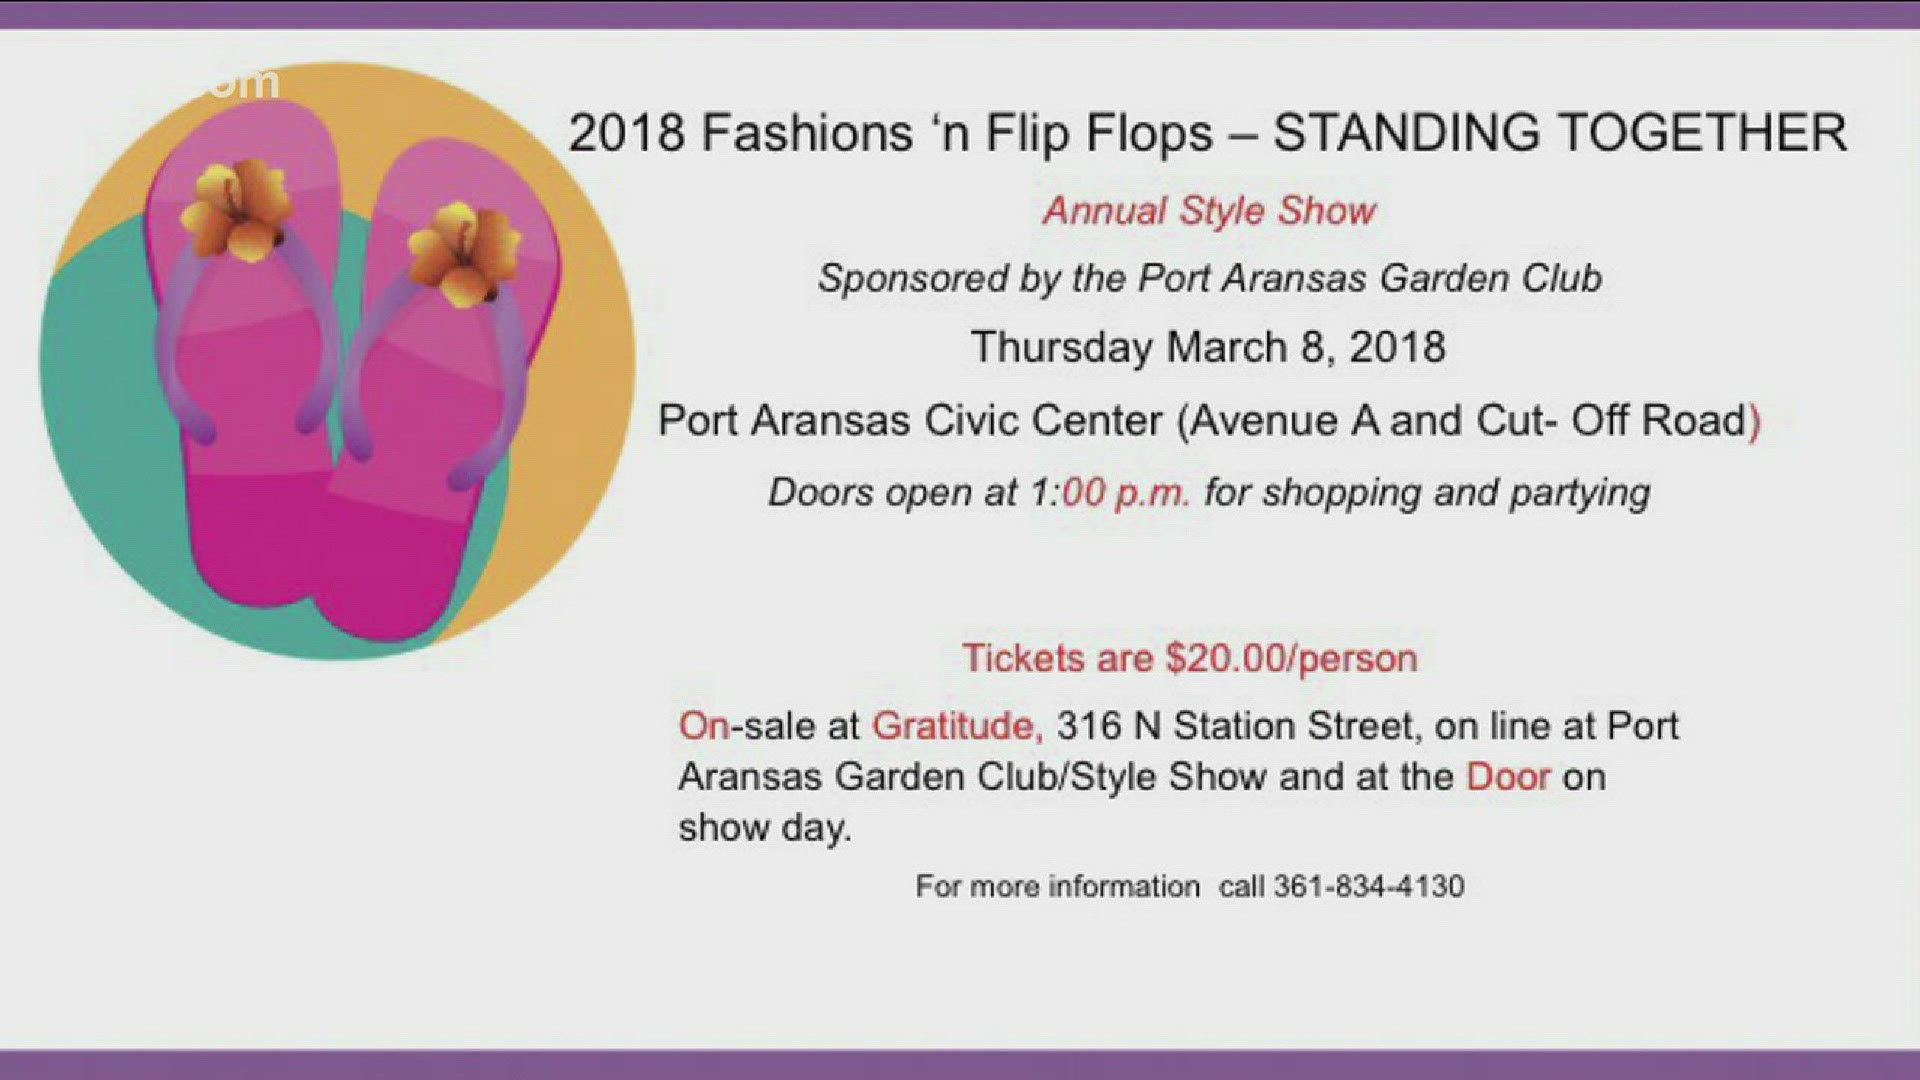 The 20th year of the style show will help raise funds for scholarships and beautification projects.